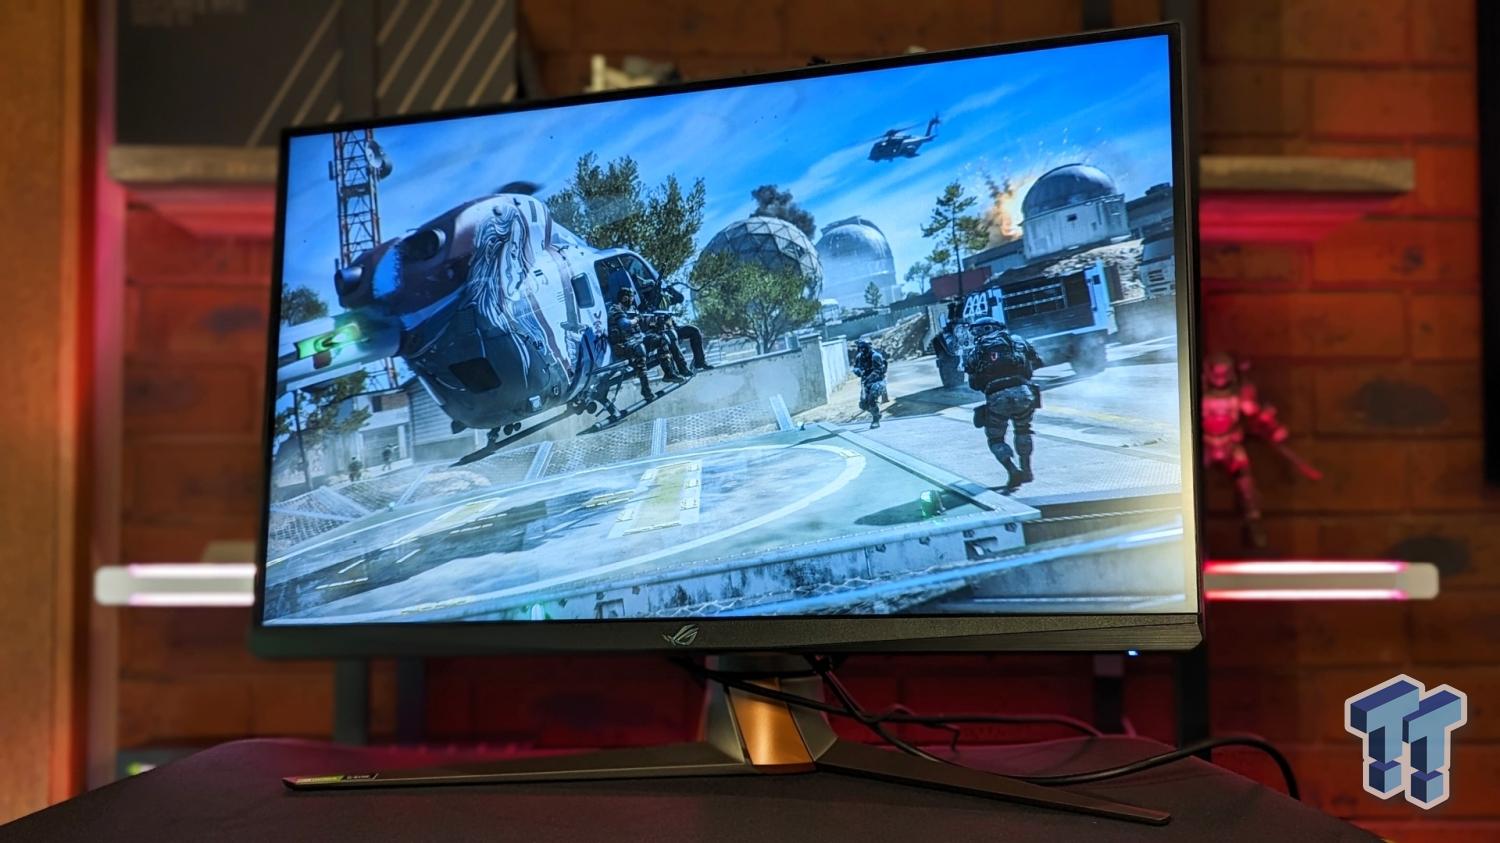 The ULTIMATE 360hz Gaming Monitor! (ASUS ROG PG259QN Review)